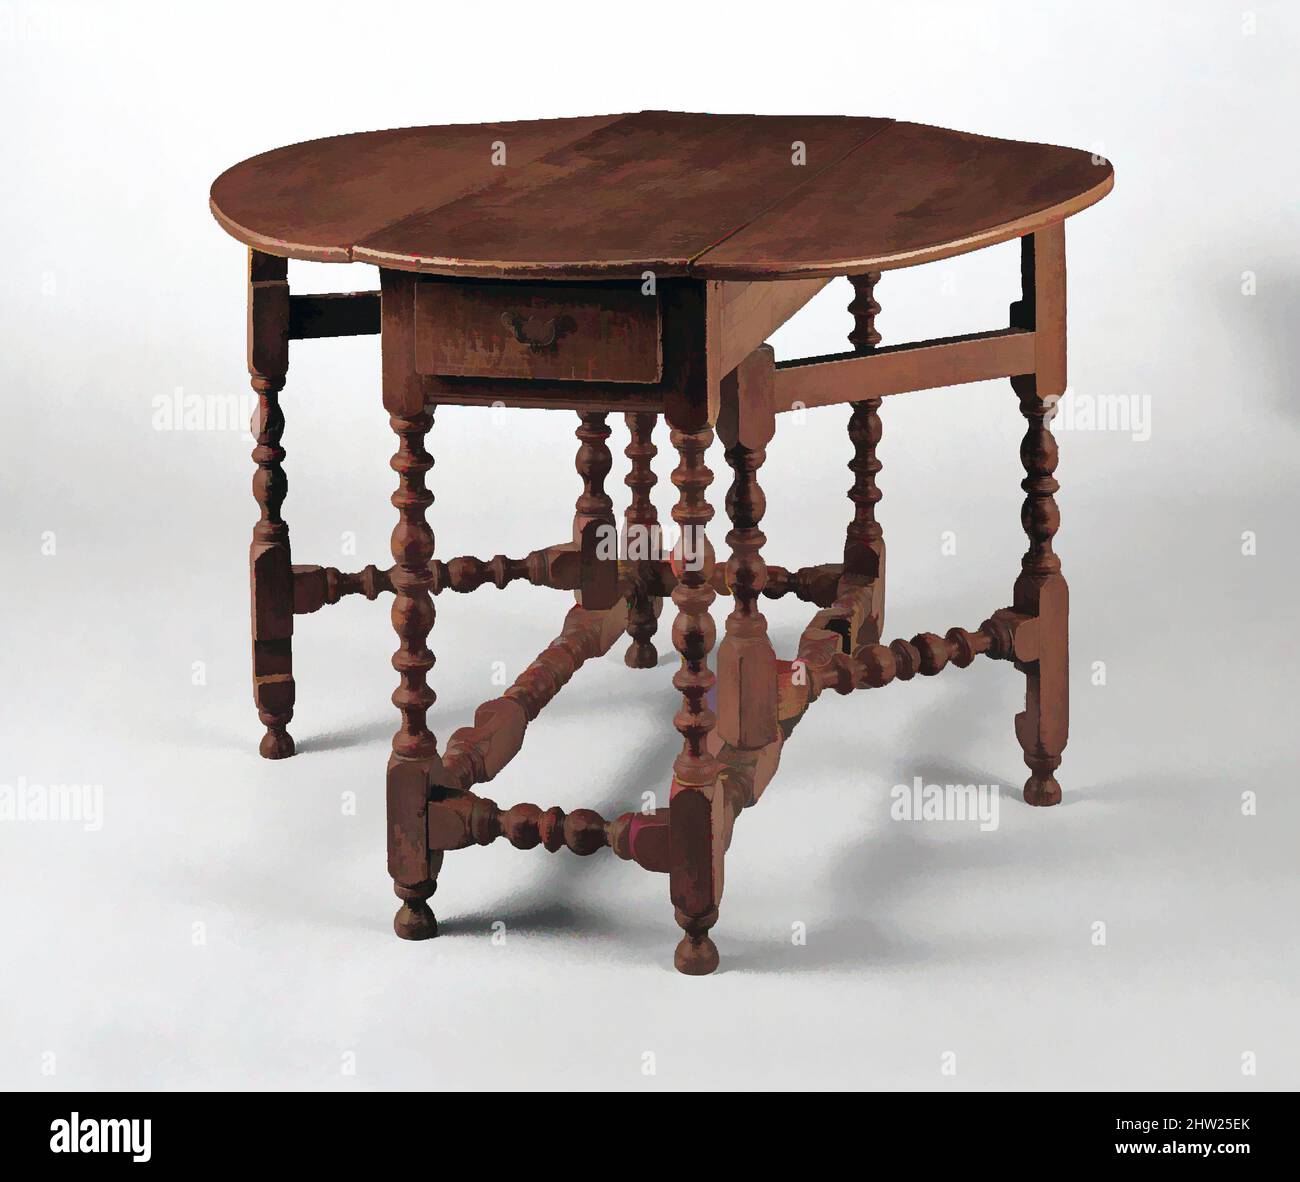 Art inspired by Drop-leaf Table, 1700–1730, Made in United States, American, Maple, 29 1/4 x 42 3/4 x 42 3/4 in. (74.3 x 108.6 x 108.6 cm), Furniture, Classic works modernized by Artotop with a splash of modernity. Shapes, color and value, eye-catching visual impact on art. Emotions through freedom of artworks in a contemporary way. A timeless message pursuing a wildly creative new direction. Artists turning to the digital medium and creating the Artotop NFT Stock Photo